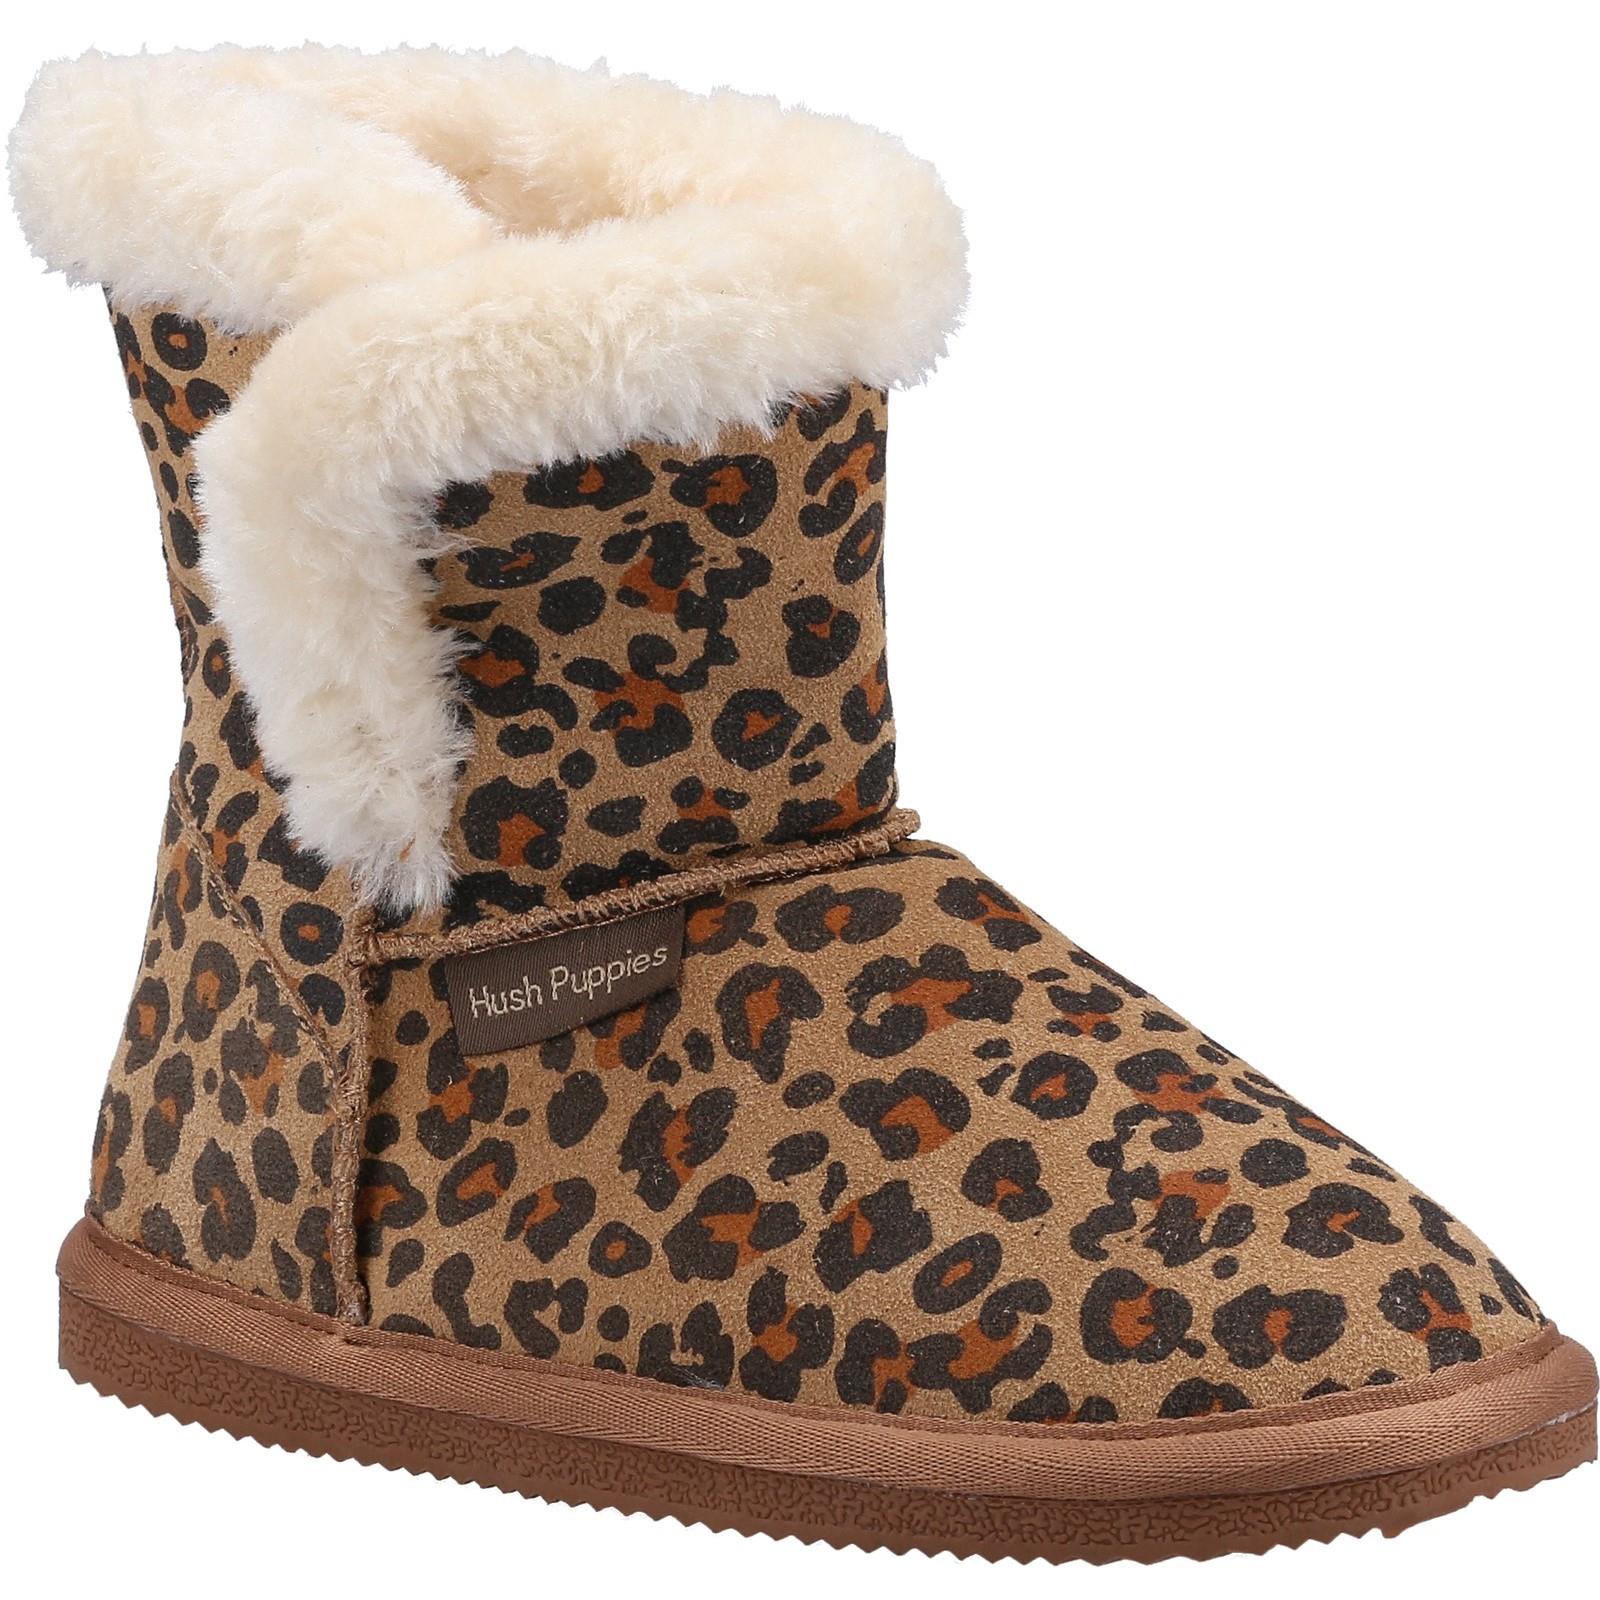 Hush Puppies Ashlynn leopard real suede classic boot style slipper